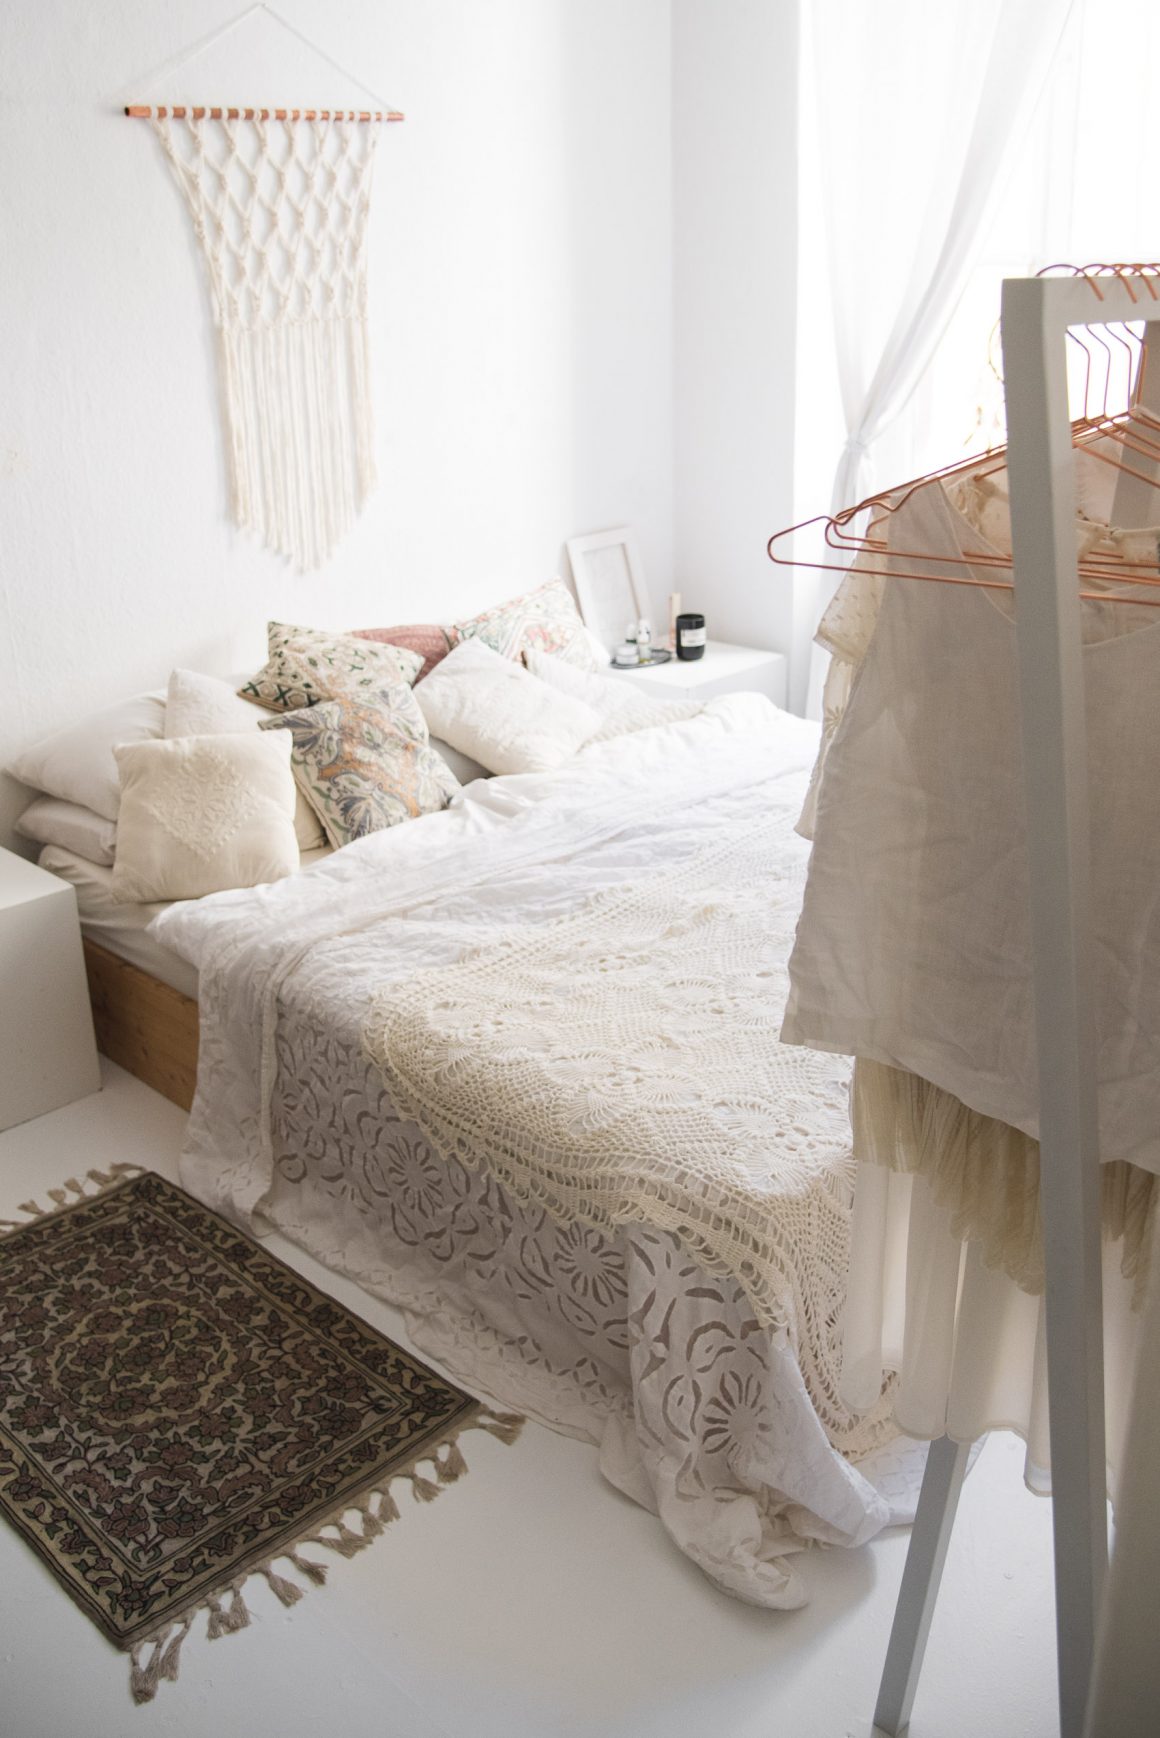 White Boho Bedroom in our Apartment - An Interior Update - heylilahey.